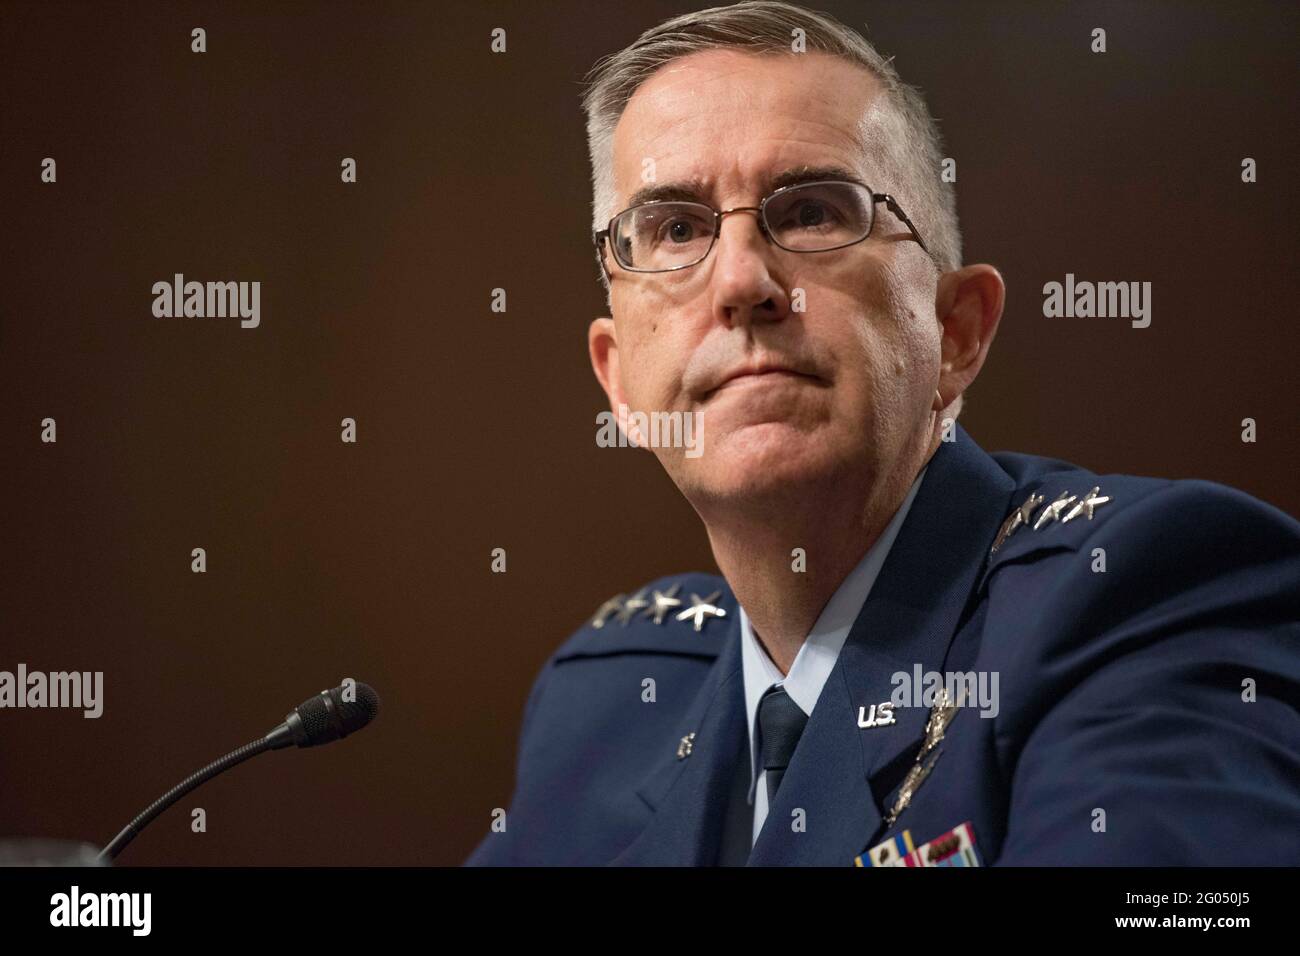 Reportage:   The commander of U.S. Strategic Command, Air Force Gen. John E. Hyten, appears at a Senate Armed Services Committee hearing on his nomination to be vice chairman of the Joint Chiefs of Staff, Washington, D.C., July 30, 2019. Stock Photo